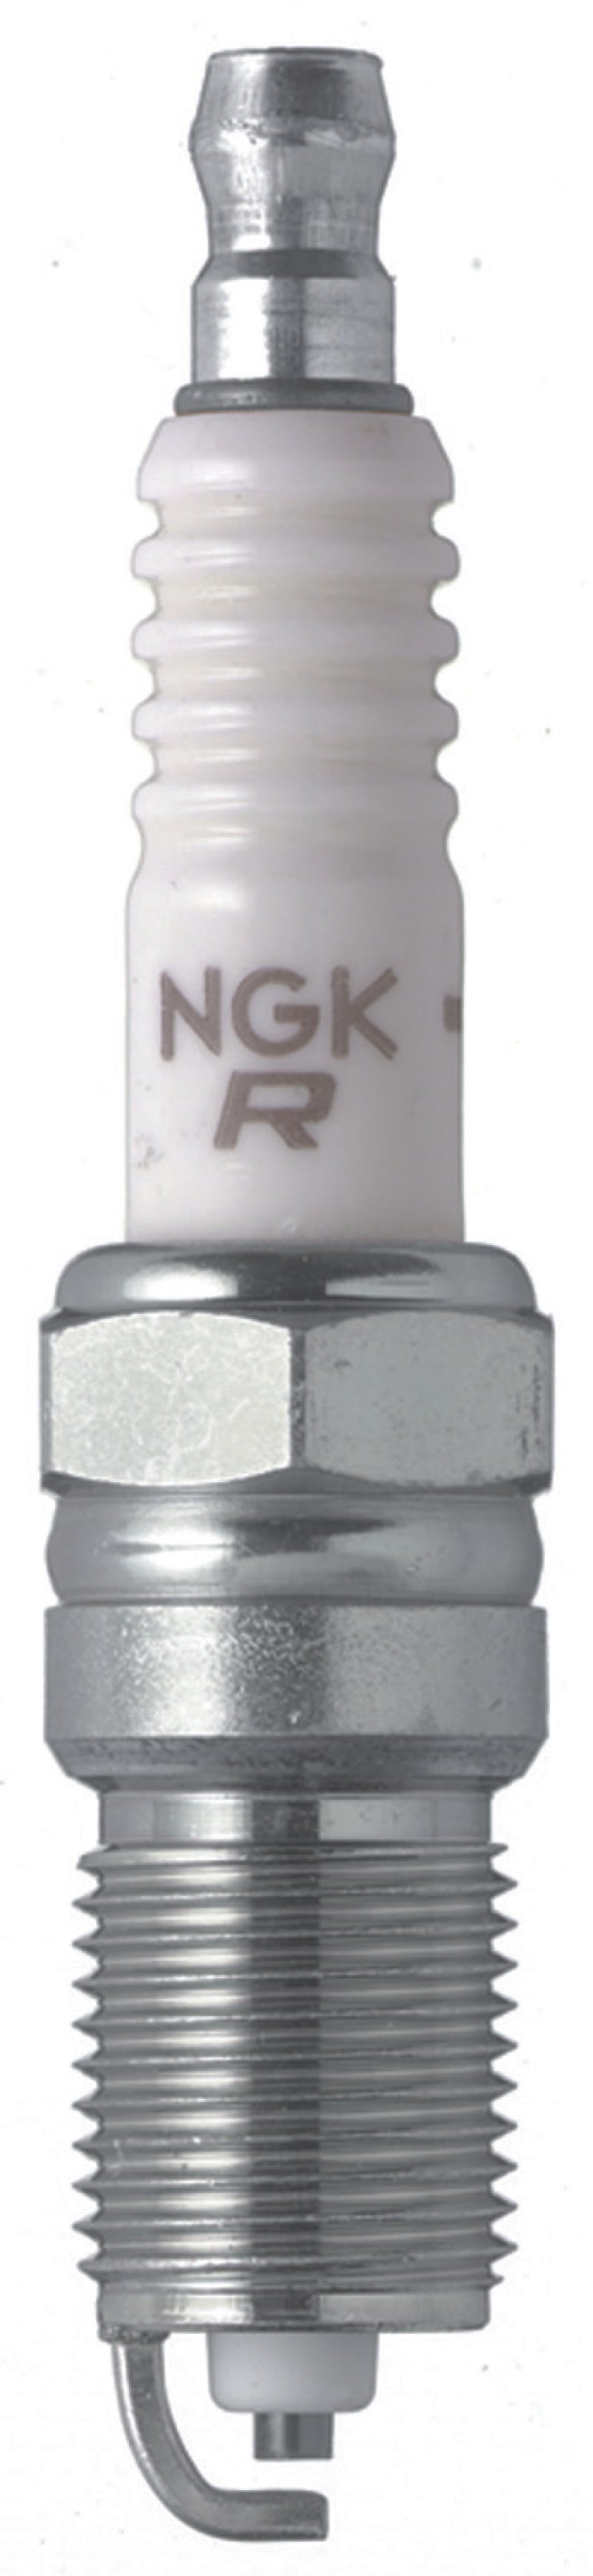 NGK Nickel Spark Plug Box of 4 (TR5) -  Shop now at Performance Car Parts